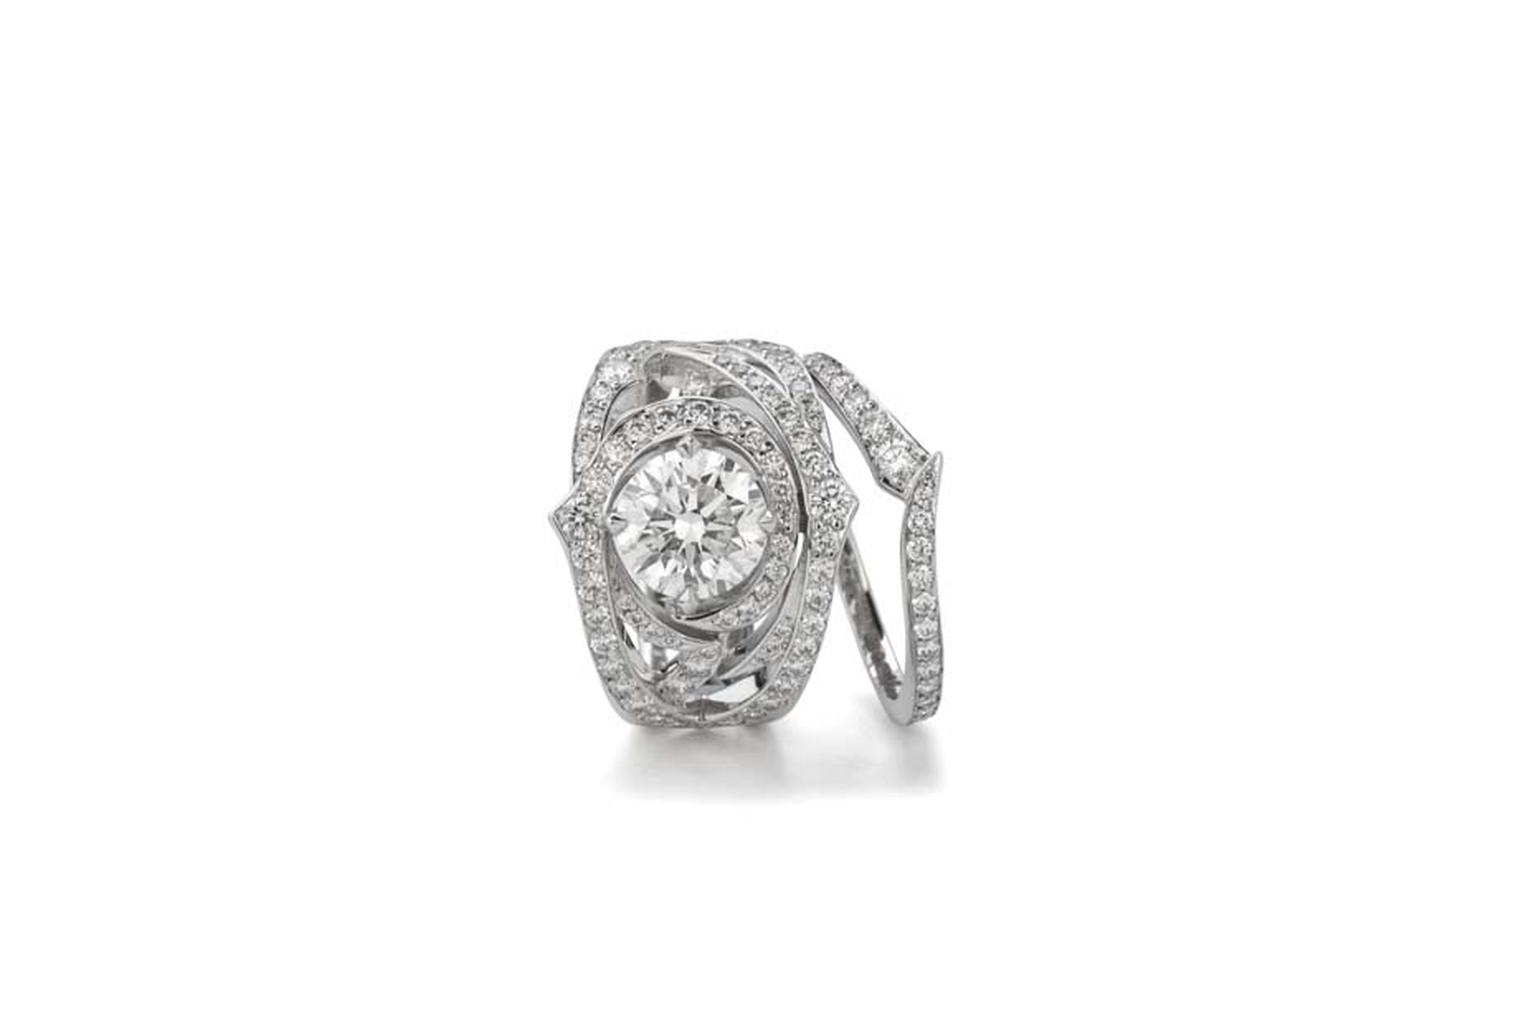 Stephen Webster's Bridal Collection 'Thorn' engagement ring and pavé diamond band with Forevermark diamonds.